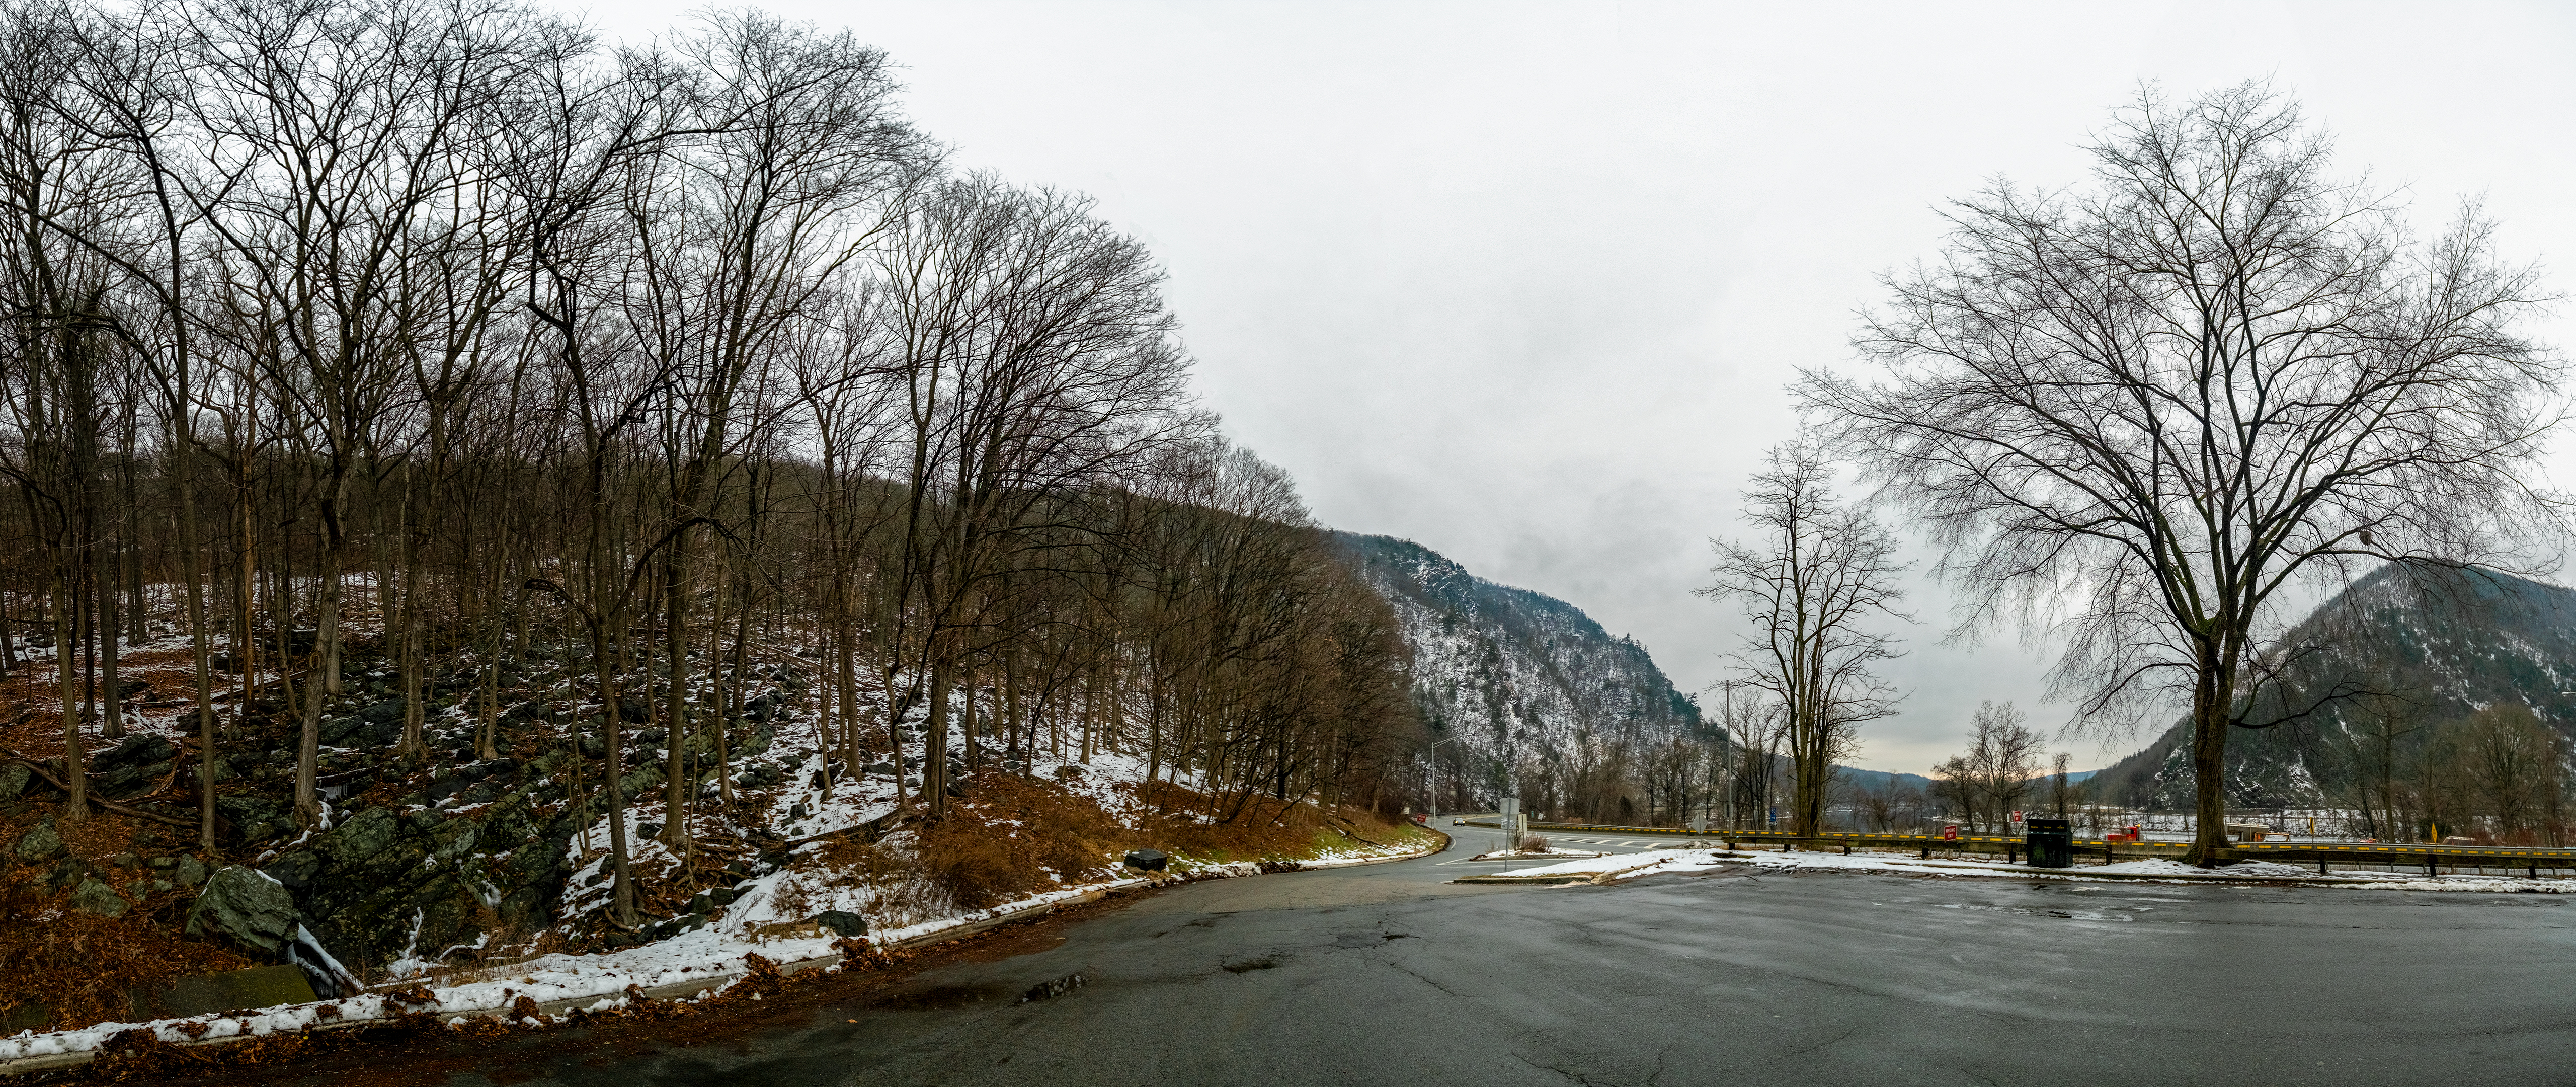 USA Road Mountains Hills Winter Landscape Panorama Overcast Wide Angle Pennsylvania 5120x2160